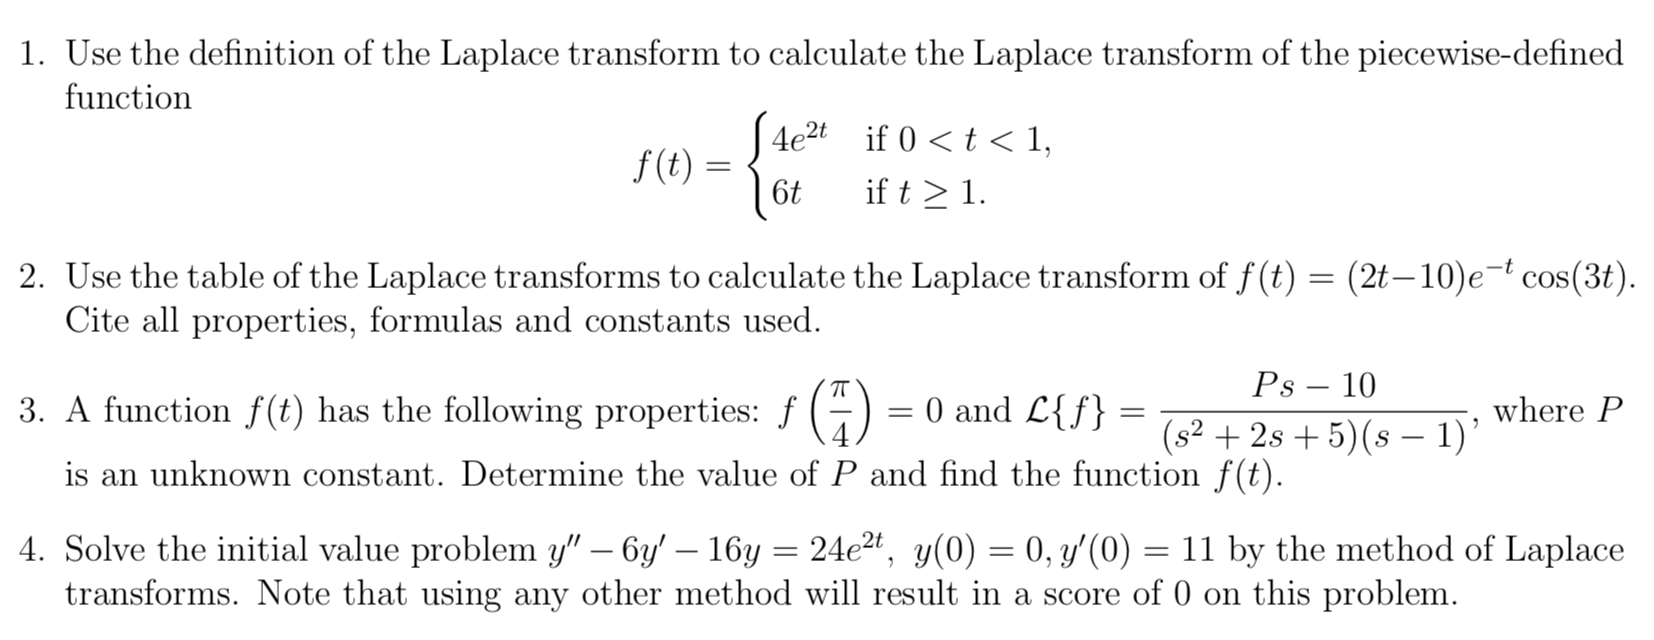 laplace transform of piecewise function